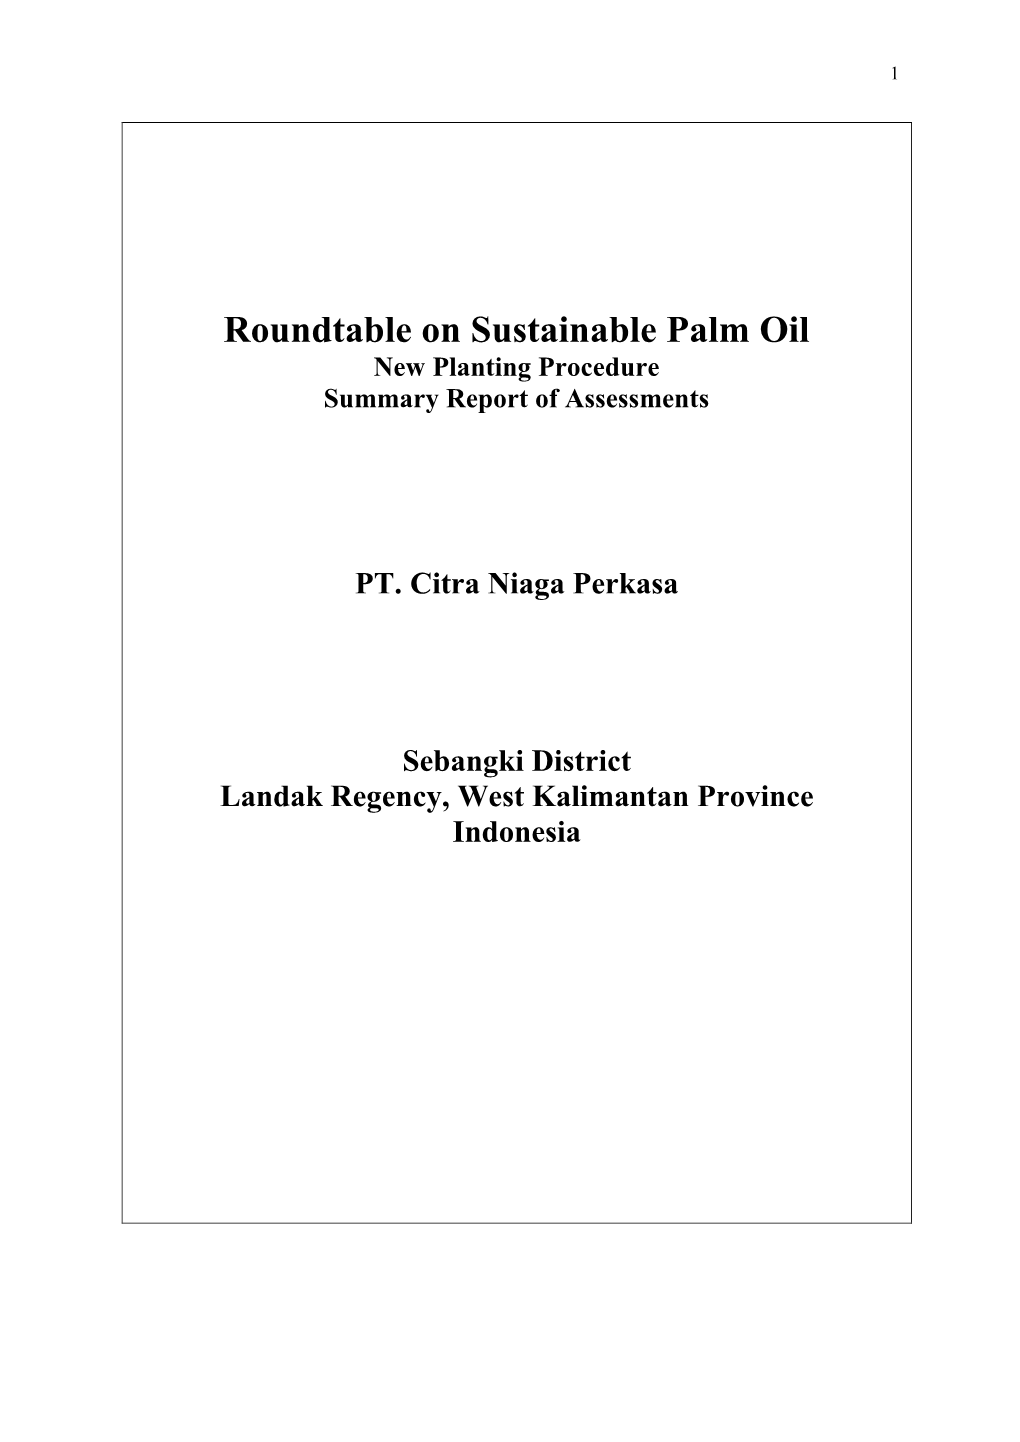 Roundtable on Sustainable Palm Oil New Planting Procedure Summary Report of Assessments